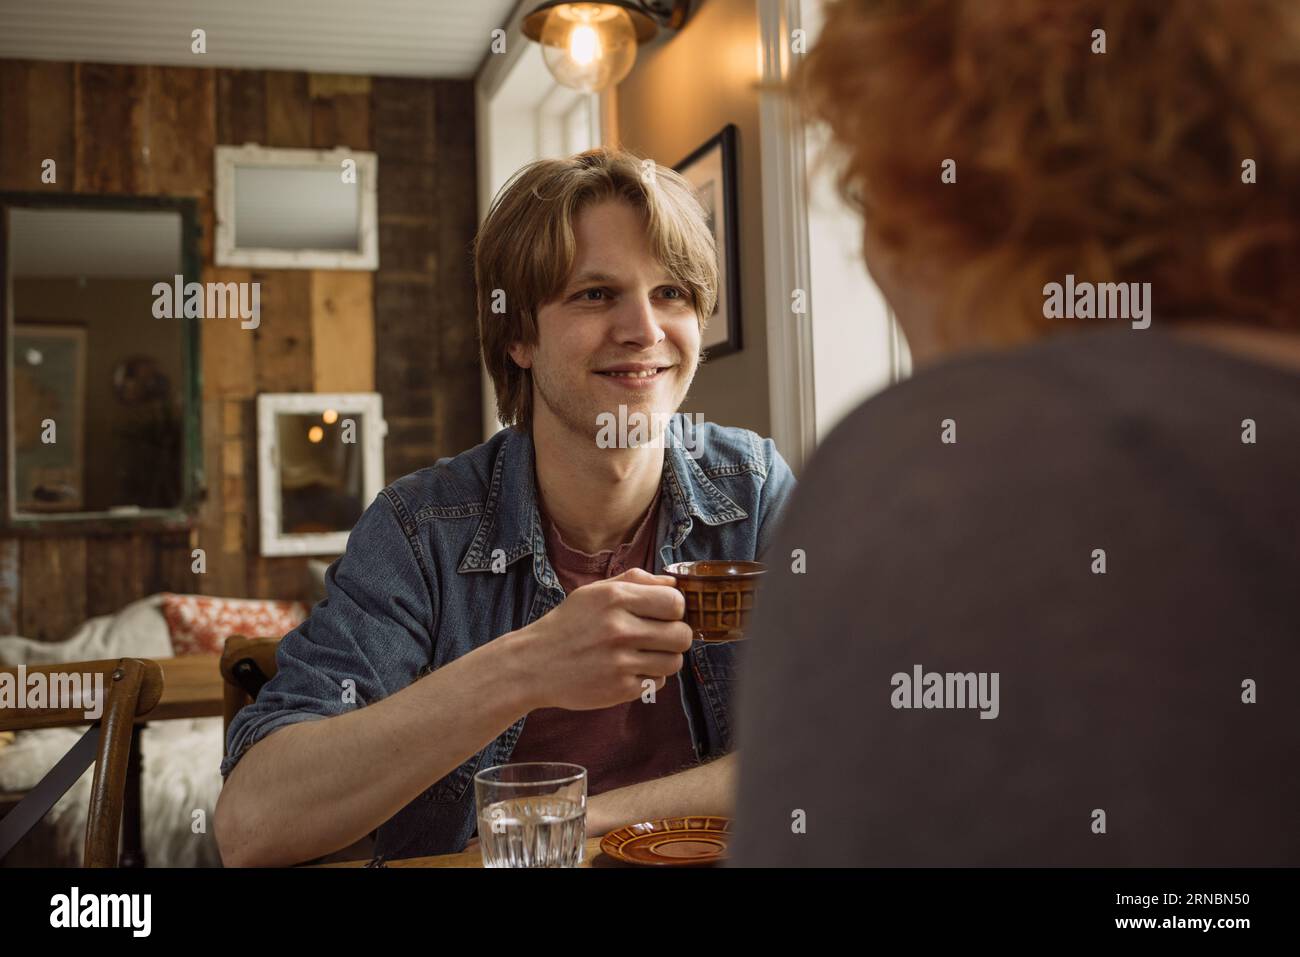 Man sitting at table with red haired woman and drinking coffee Stock Photo